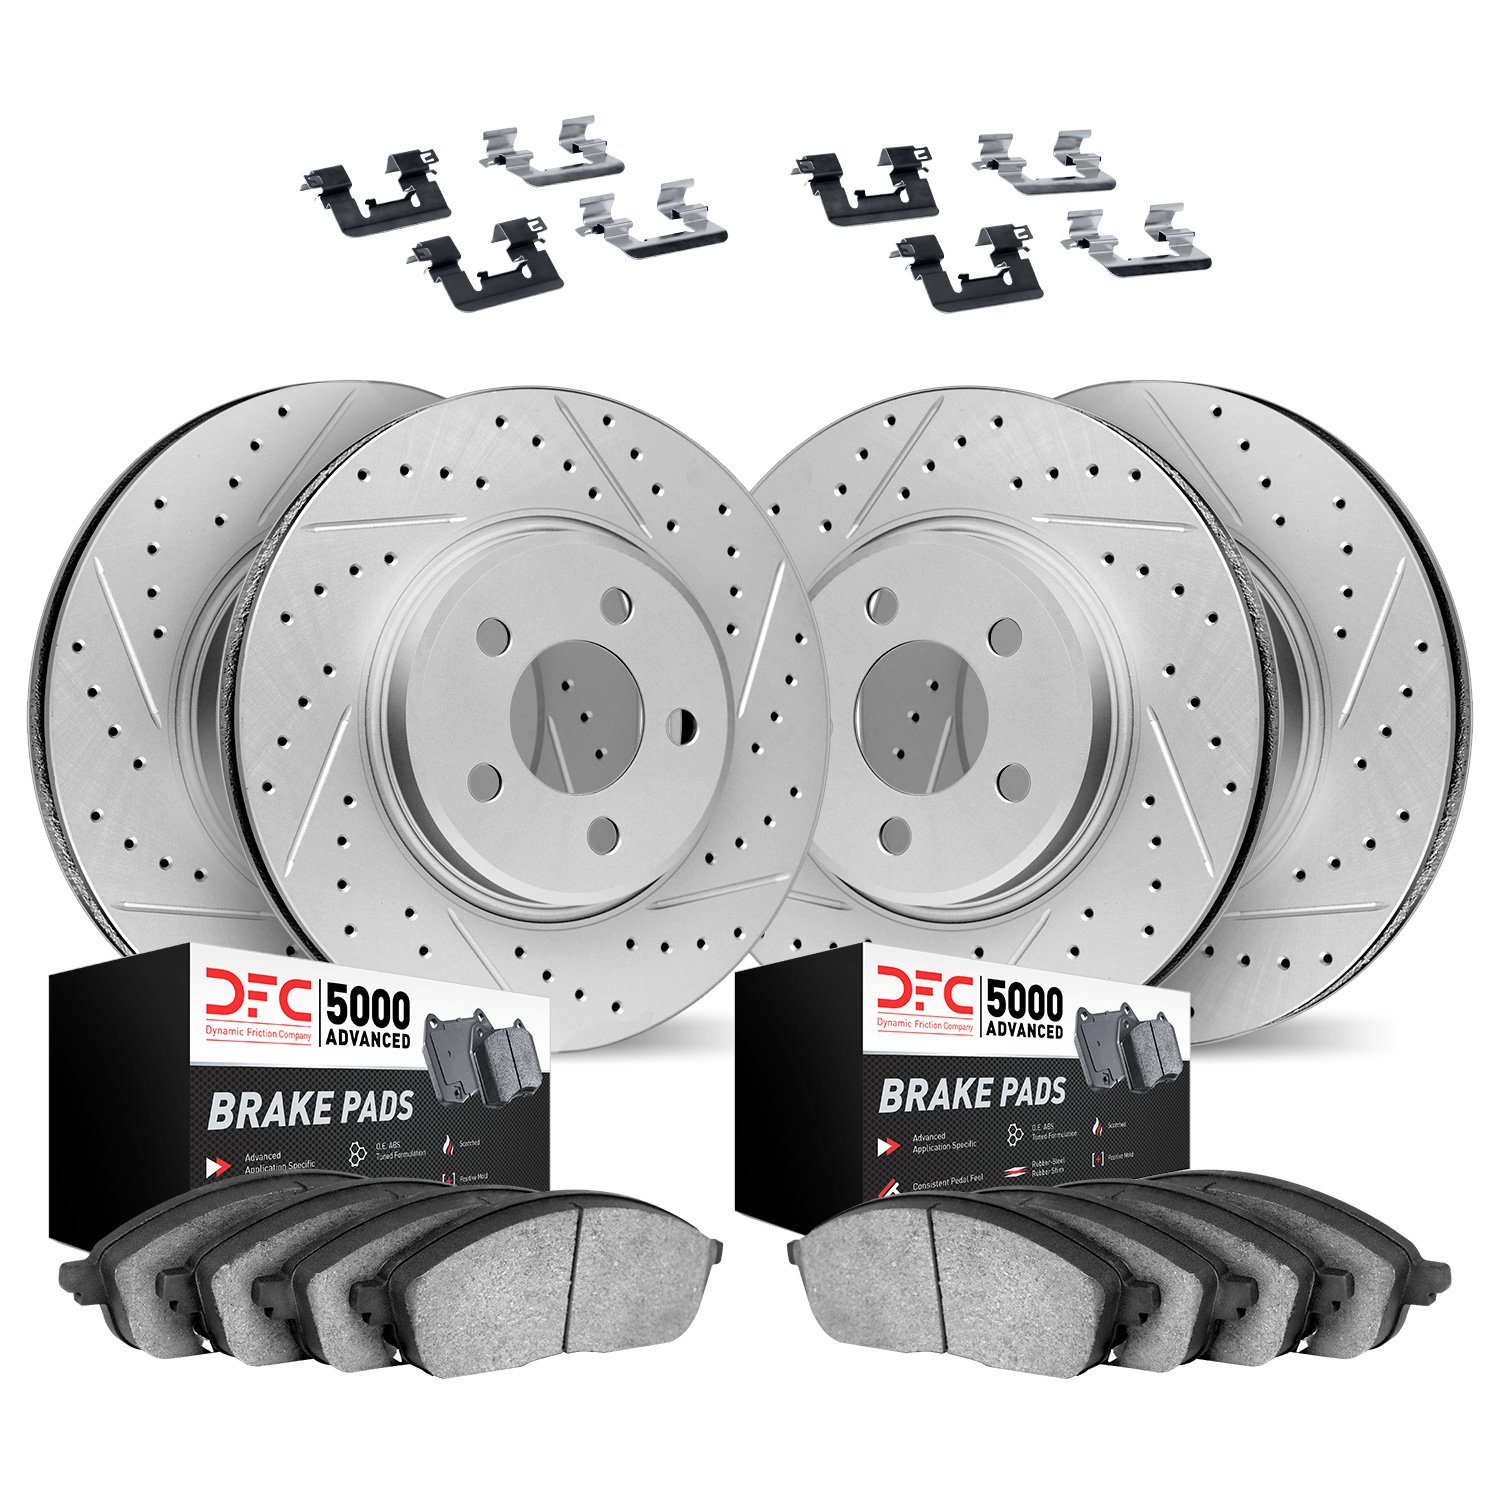 2514-31004 Geoperformance Drilled/Slotted Rotors w/5000 Advanced Brake Pads Kit & Hardware, 2000-2003 BMW, Position: Front and R